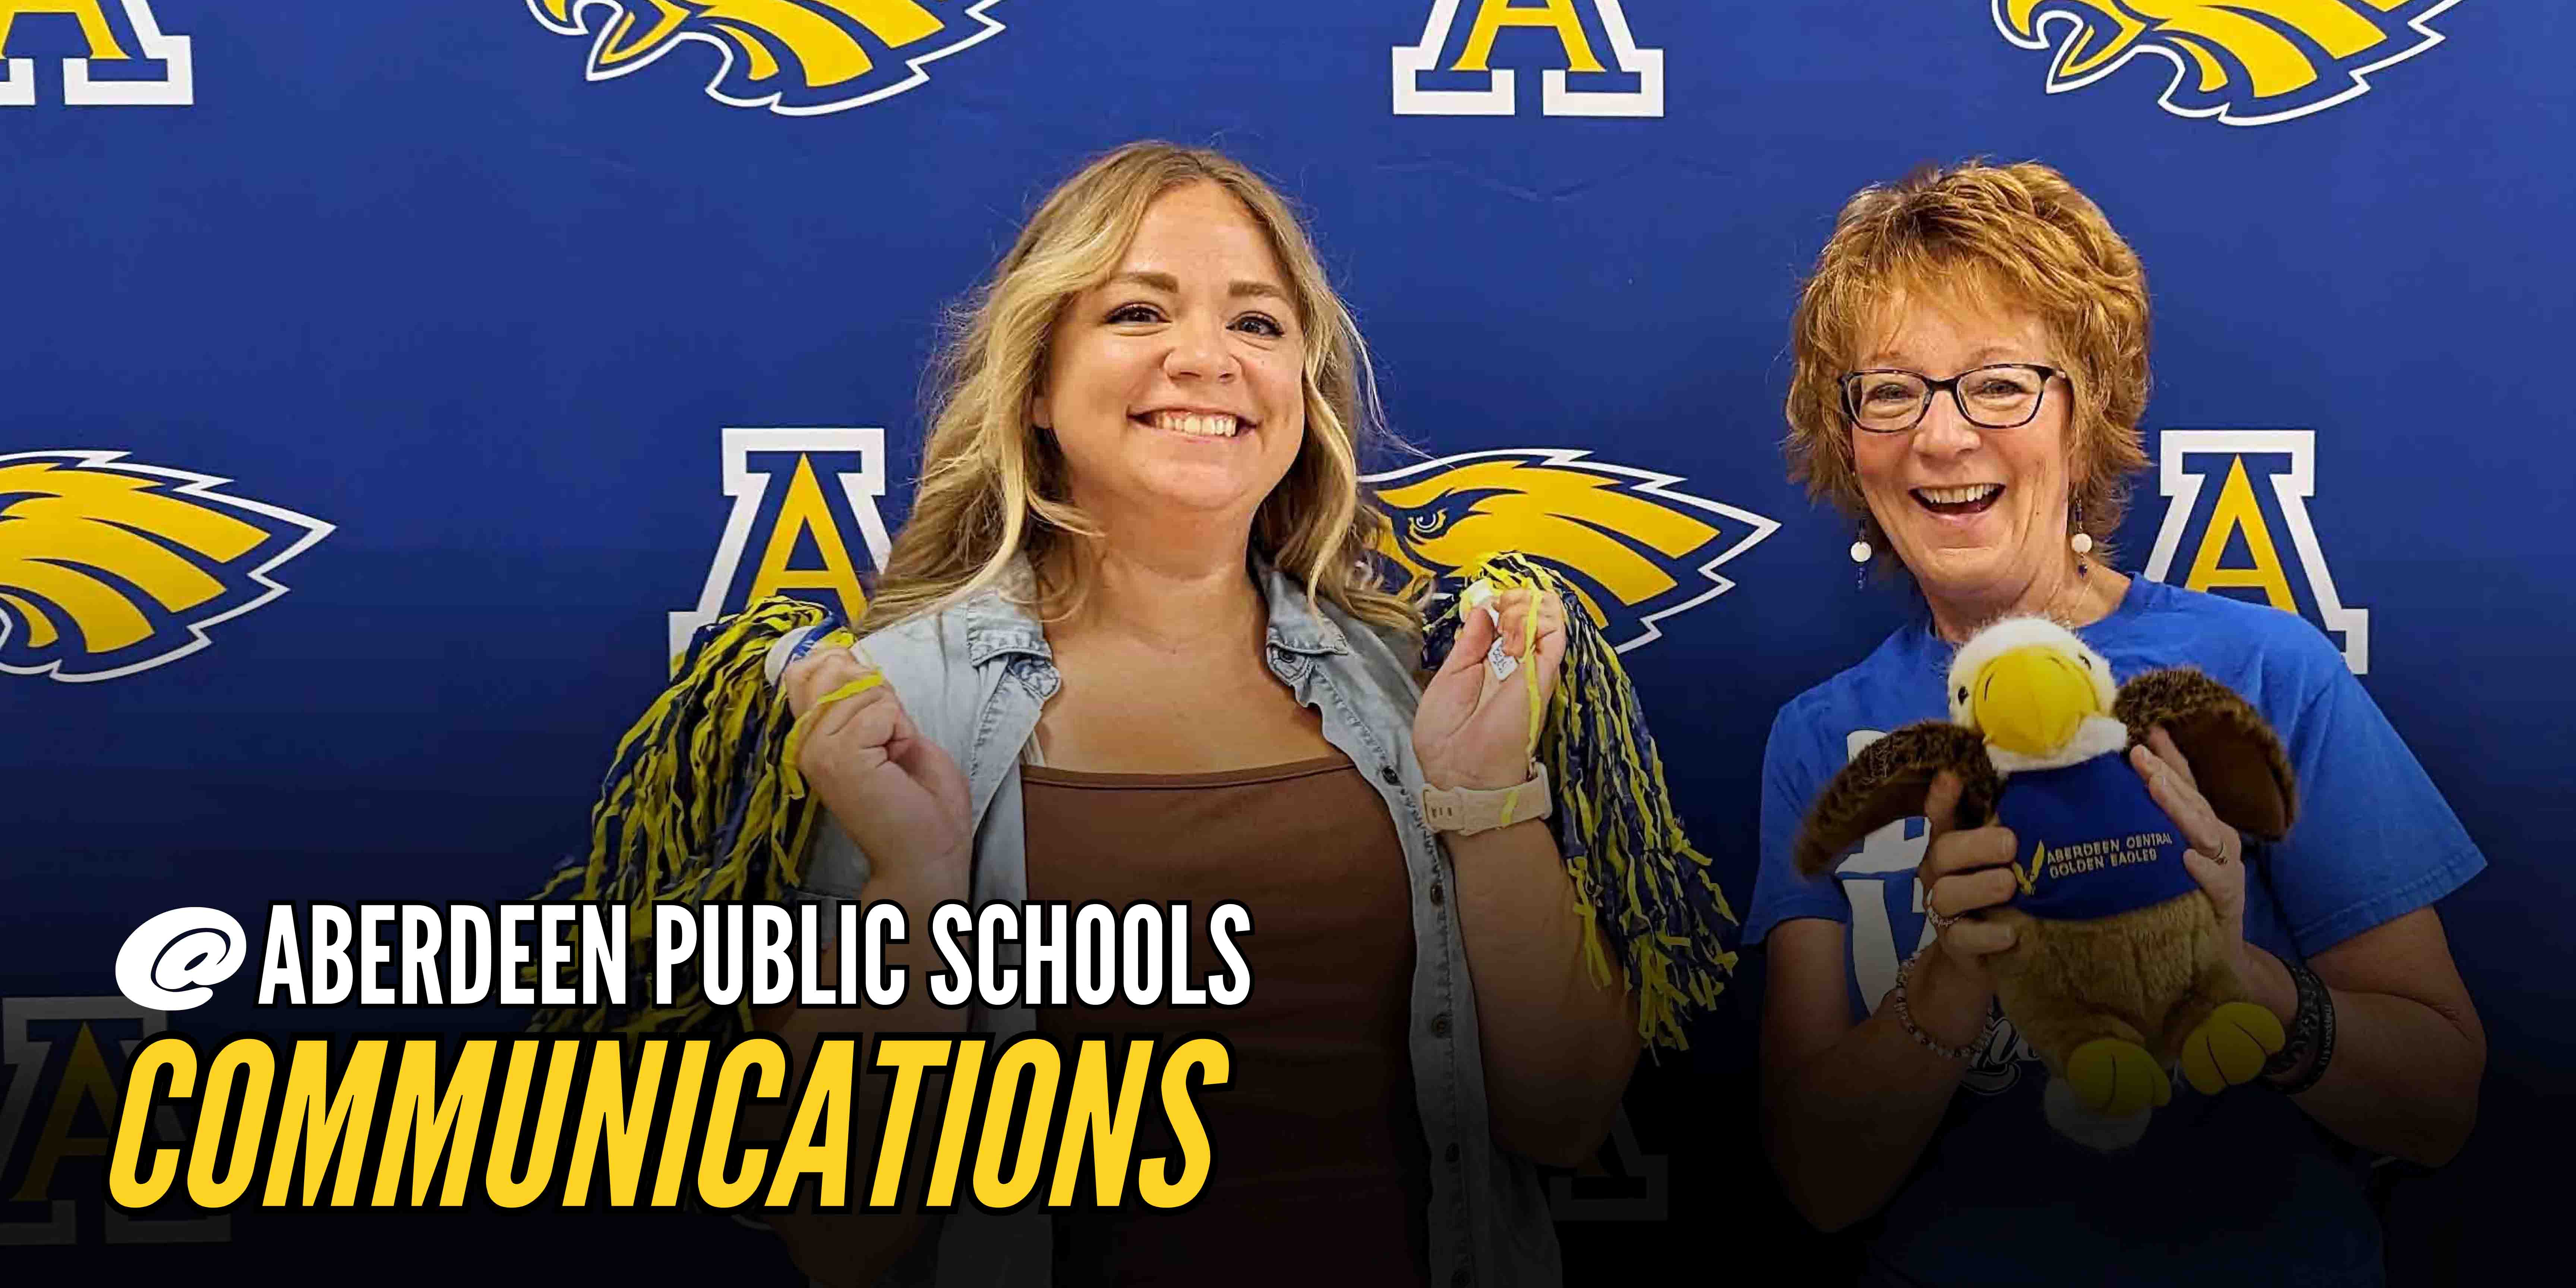 Two staff members holding Aberdeen Public Schools gear in front of the backdrop with text: @ Aberdeen Public Schools Communications